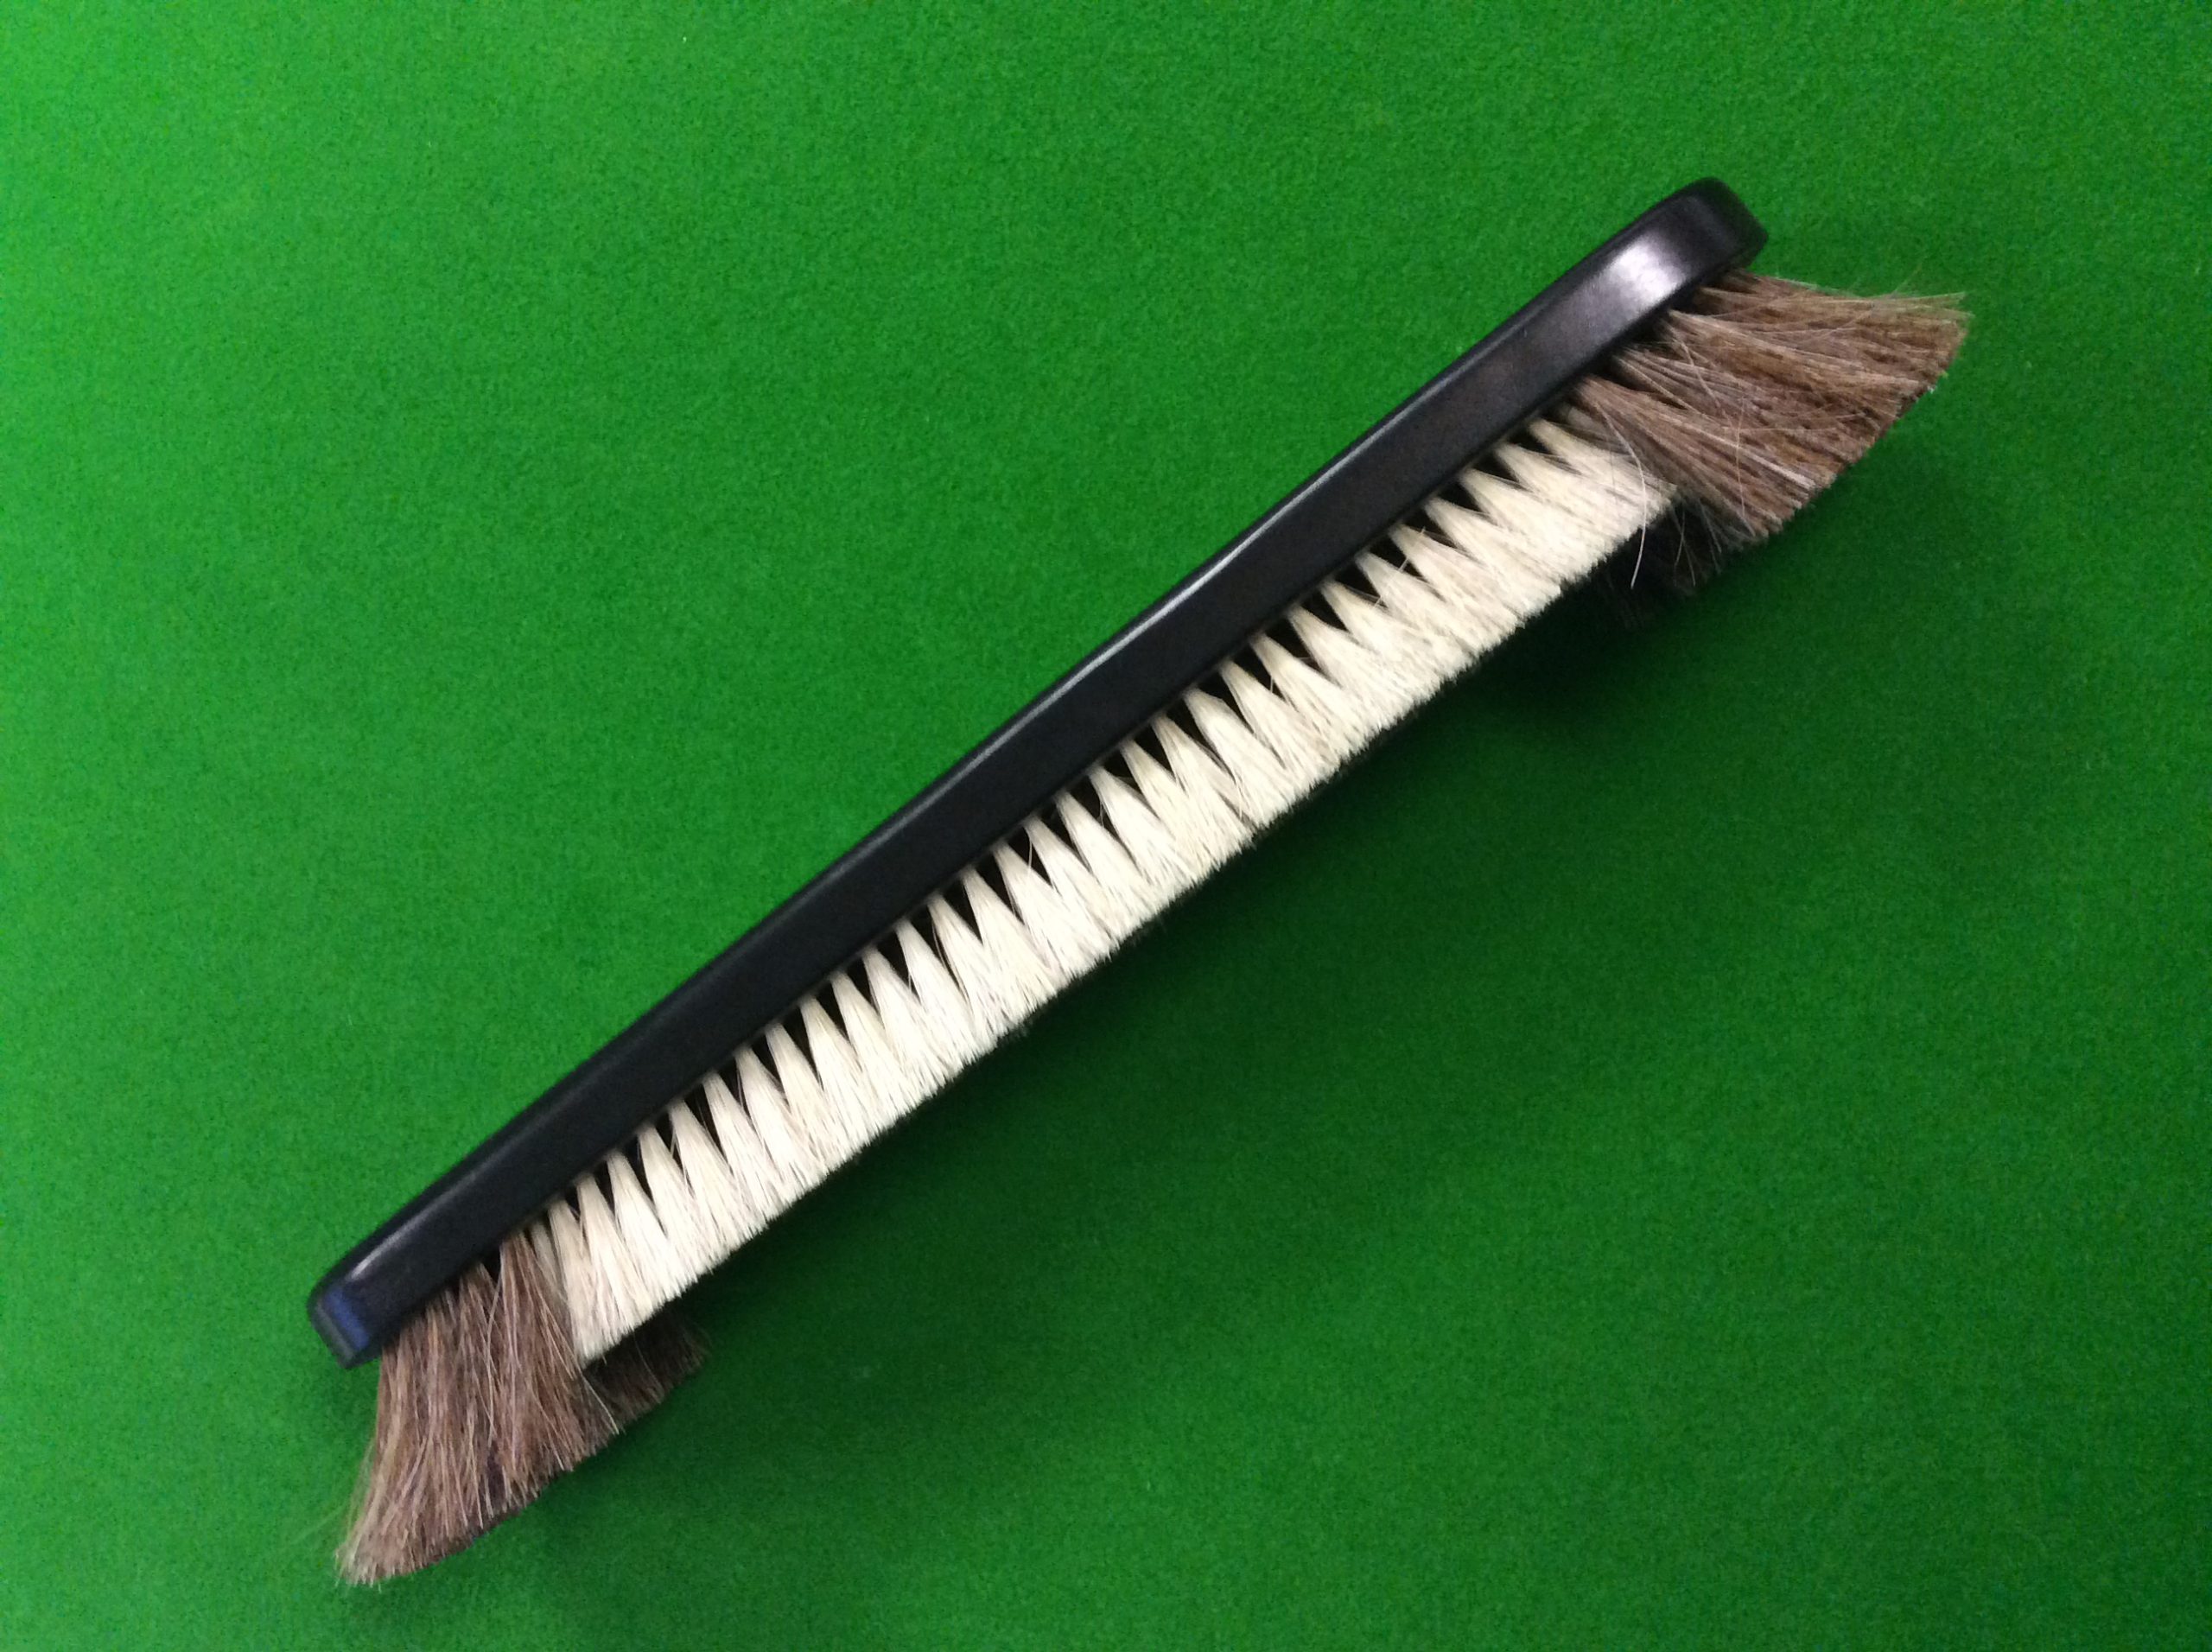 12 inch Snooker table brush from Blue Moon Leisure